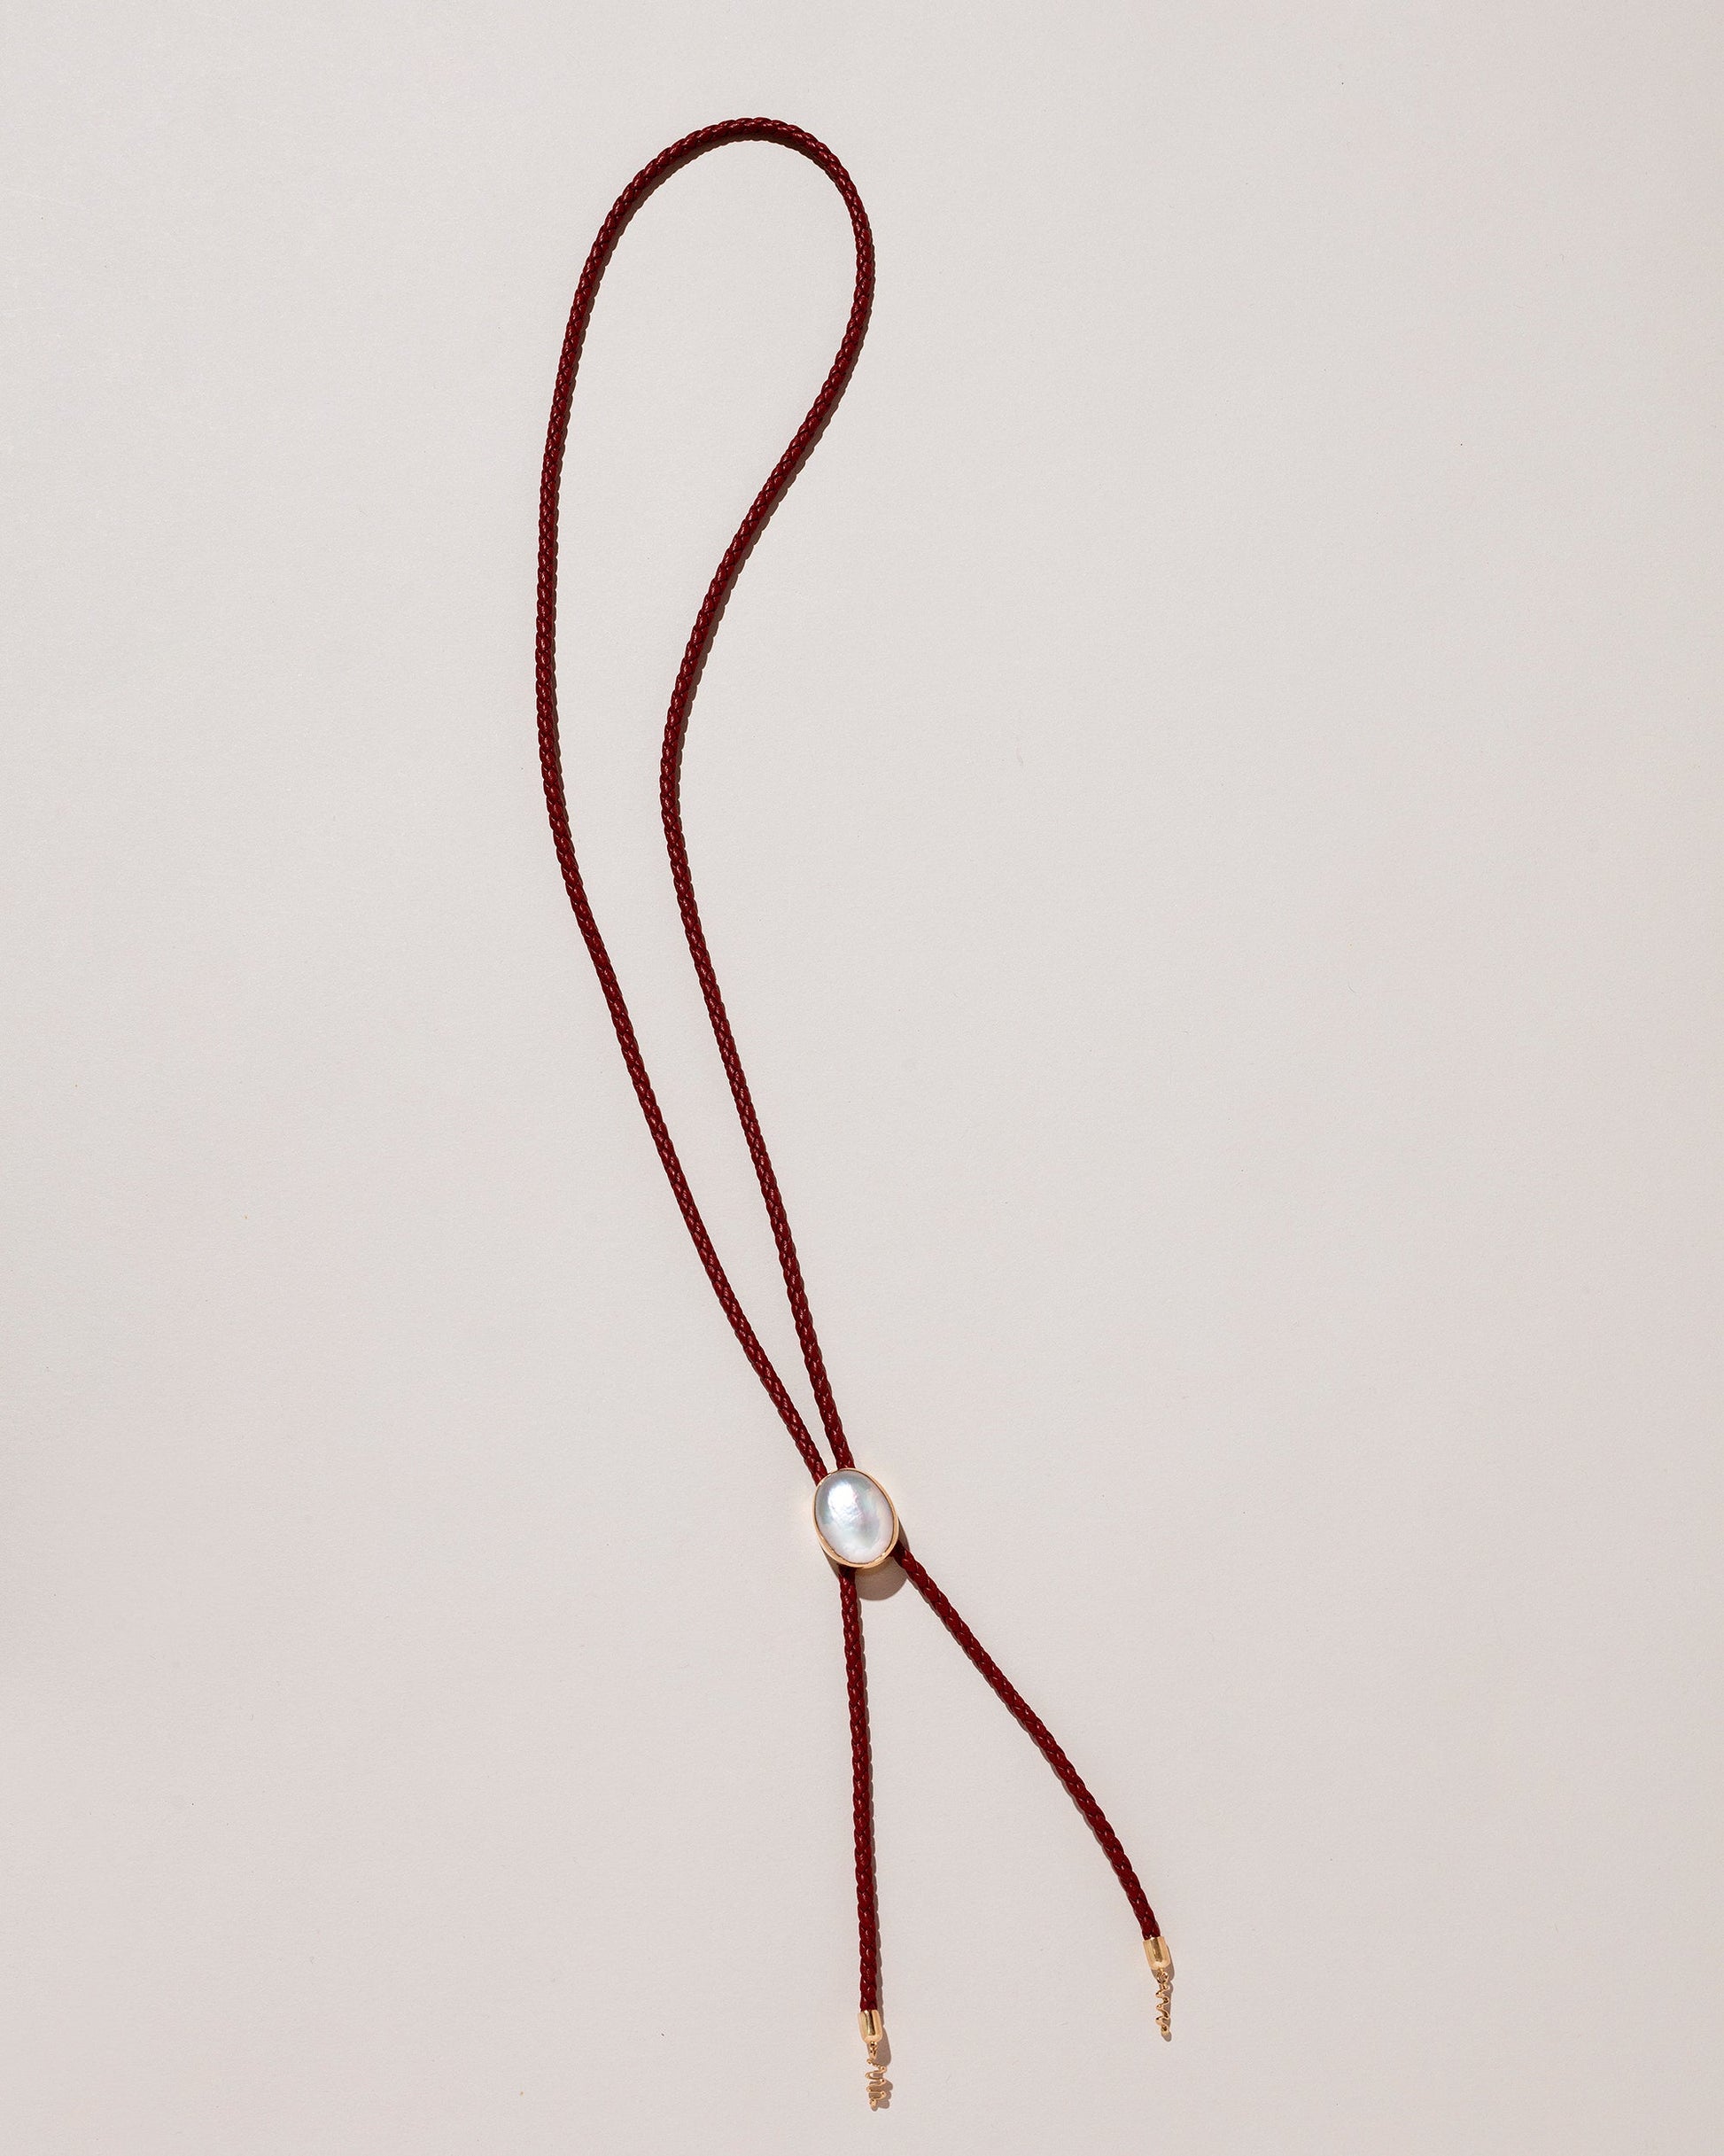  Pearl Snake Bolo on light color background.